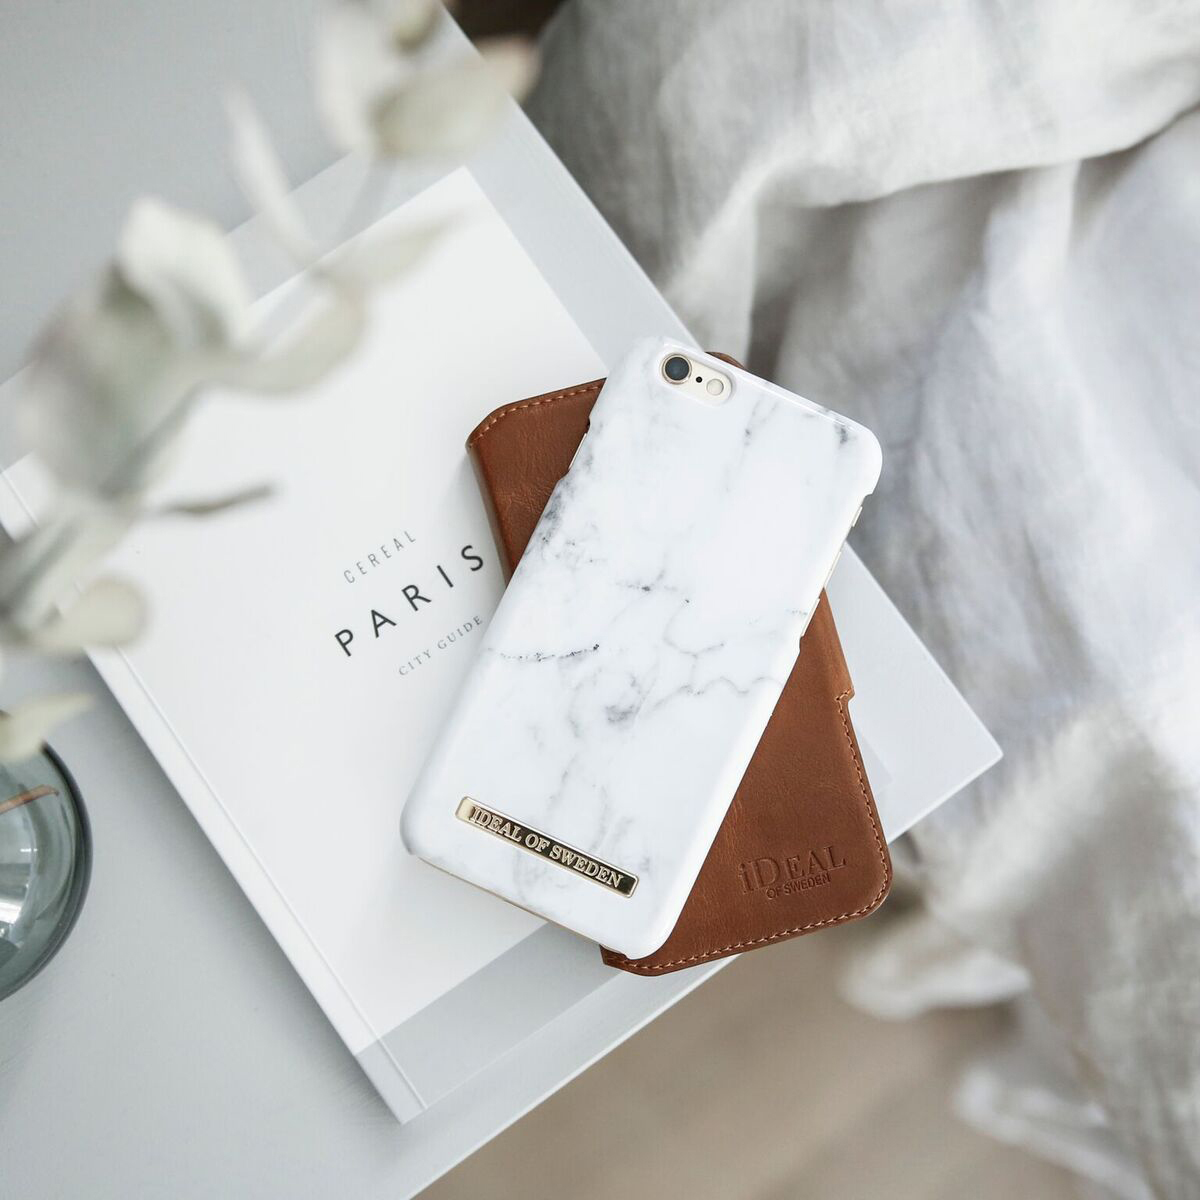 Fashion, 7, Apple, OF iPhone Backcover, IDEAL 8, Marble SWEDEN White iPhone 6, iPhone